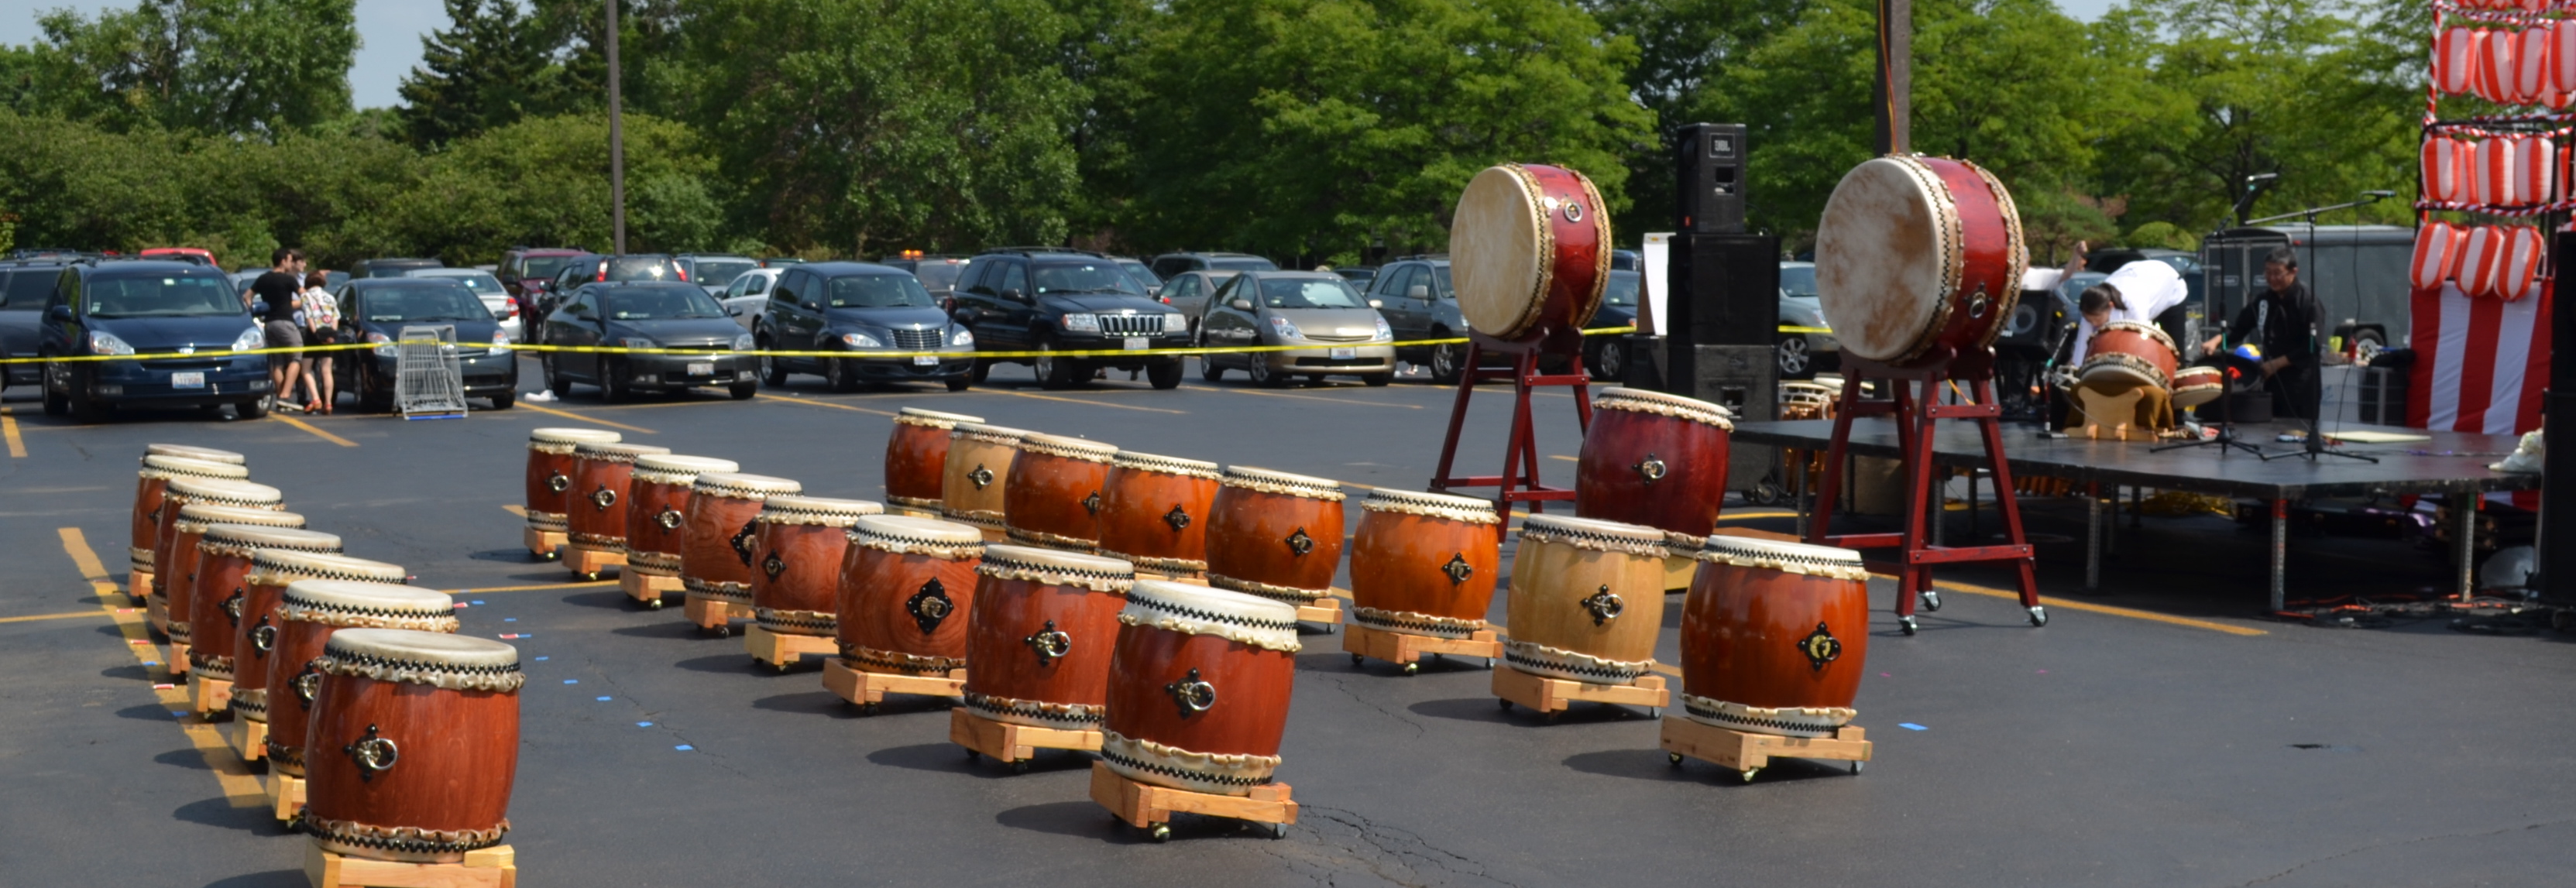 Taiko drums at Mitsui Market, Arlington Heights, IL